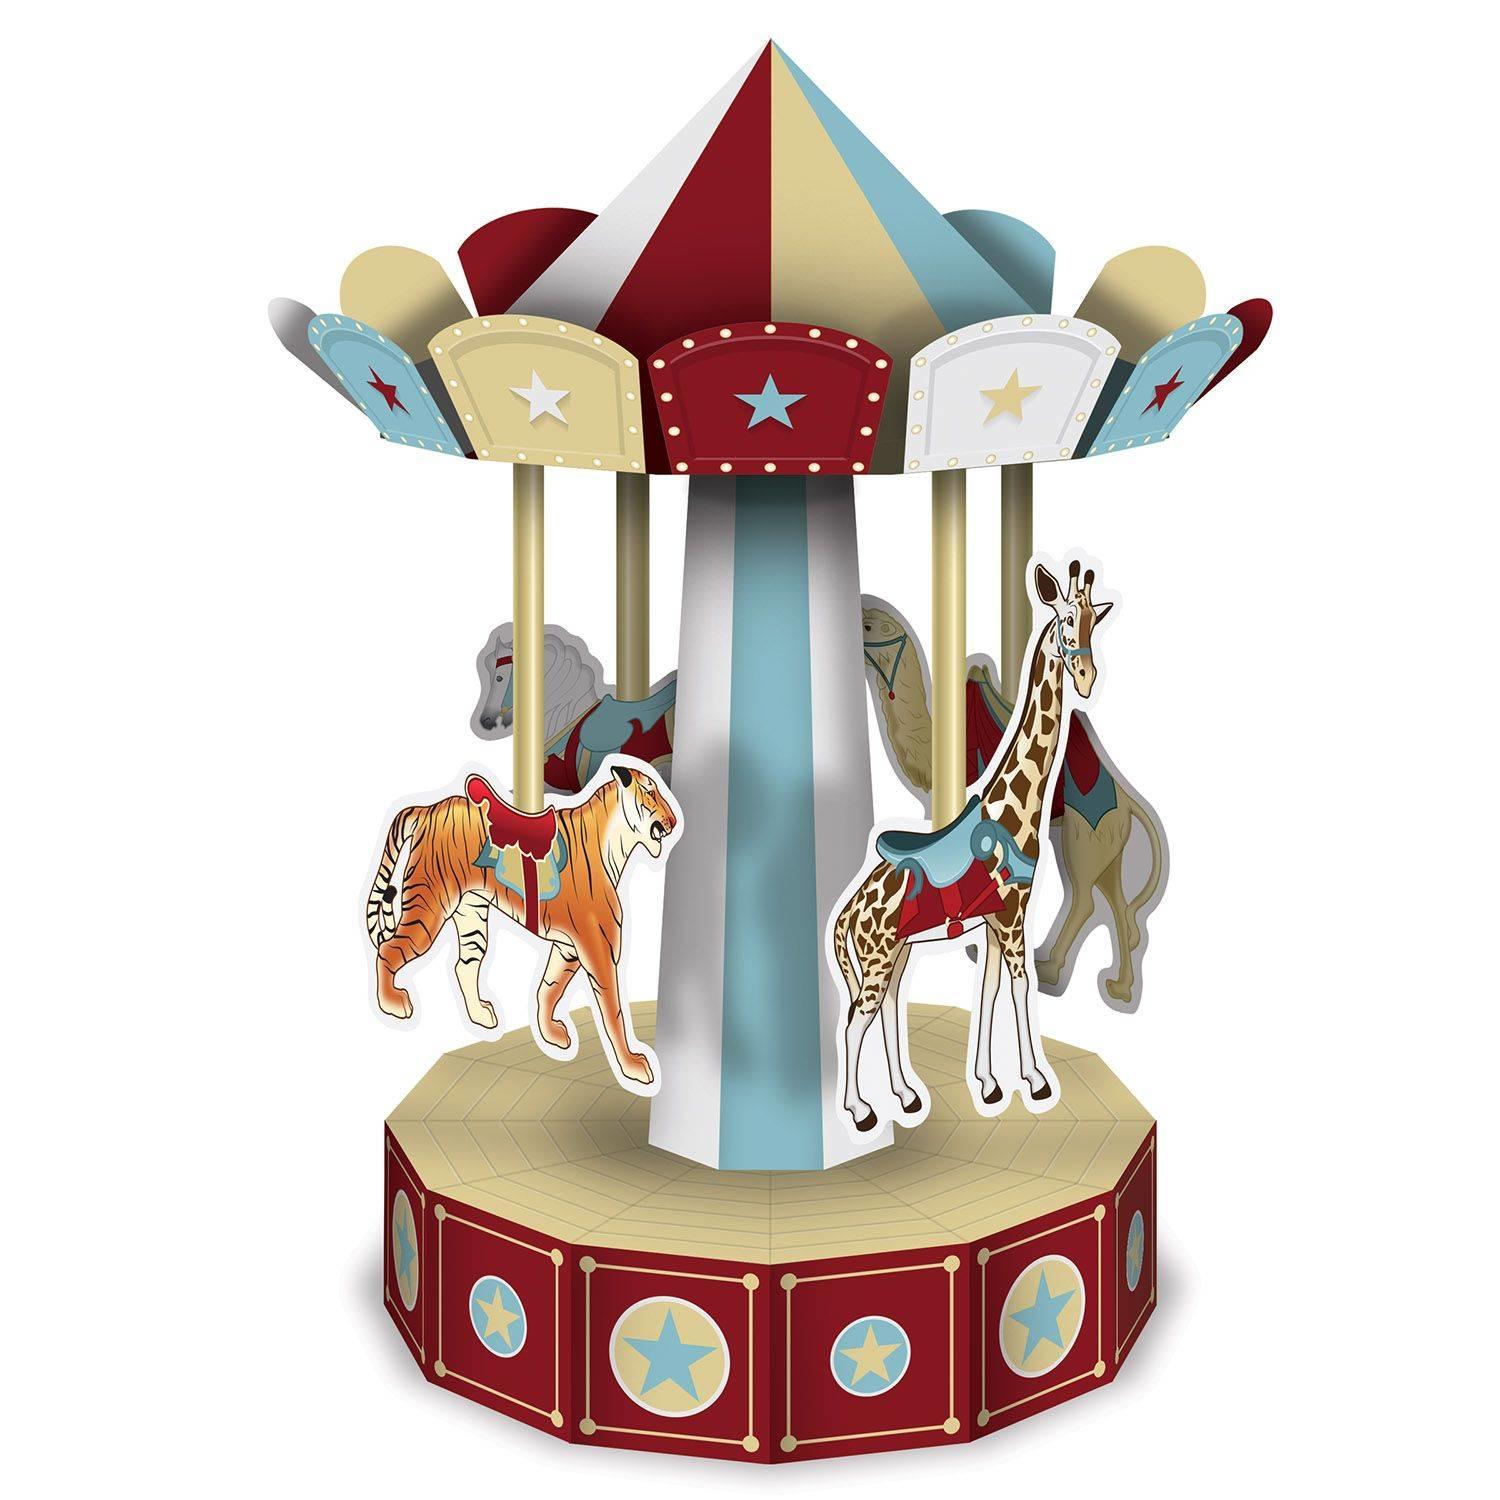 3D Vintage Circus Carousel Centerpiece by Beistle 59996 available here at Karnival Costumes online party shop